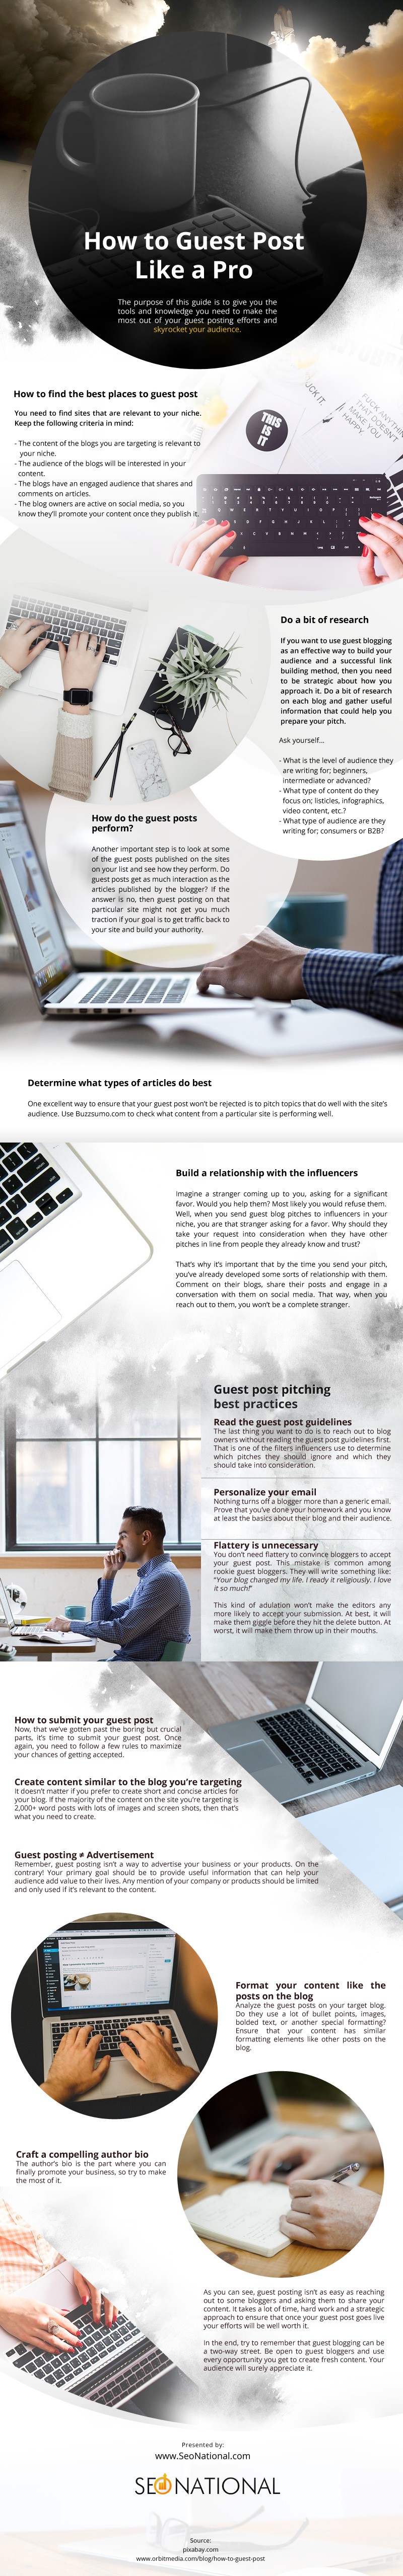 How to Guest Post Like a Pro Infographic